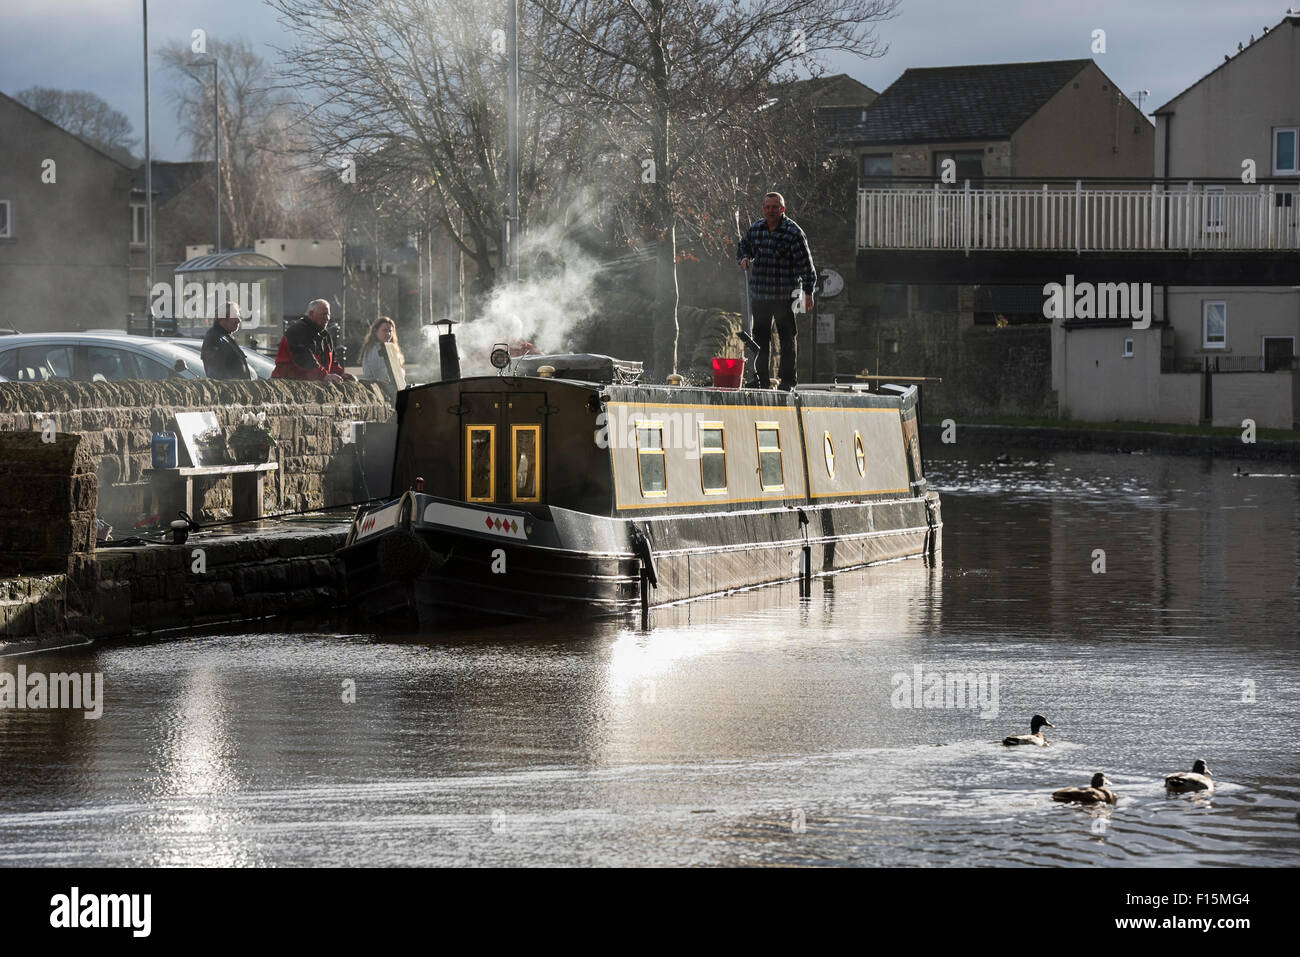 Watched by people, man with brush, is standing on roof & washing moored canal boat - Leeds Liverpool Canal, Skipton, North Yorkshire England, UK. Stock Photo